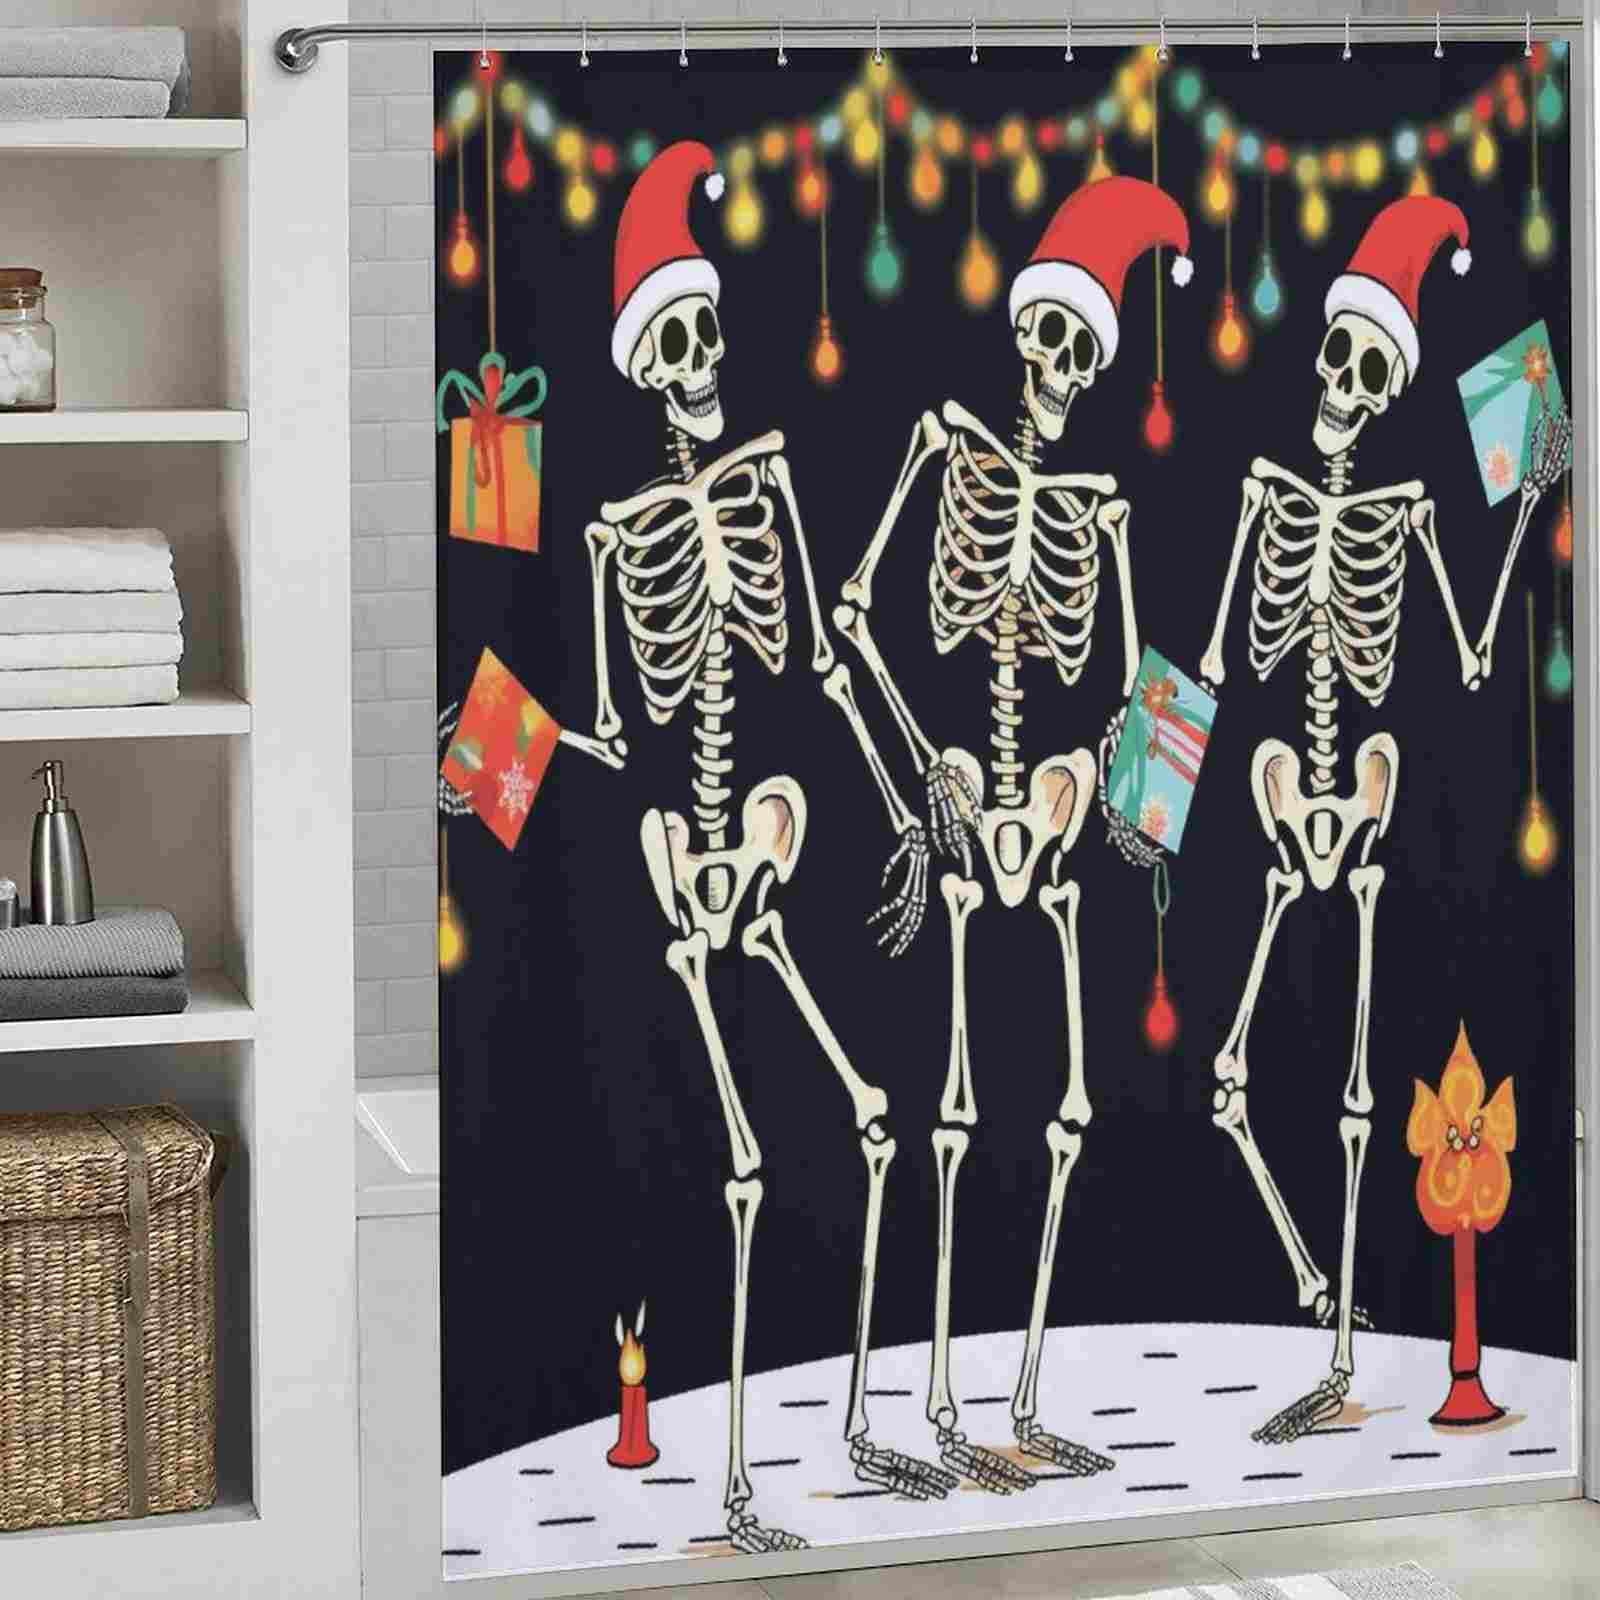 Three skeletal figures in Santa hats decorate the Gothic Skull Dancing Skeletons Christmas Shower Curtain by Cotton Cat.